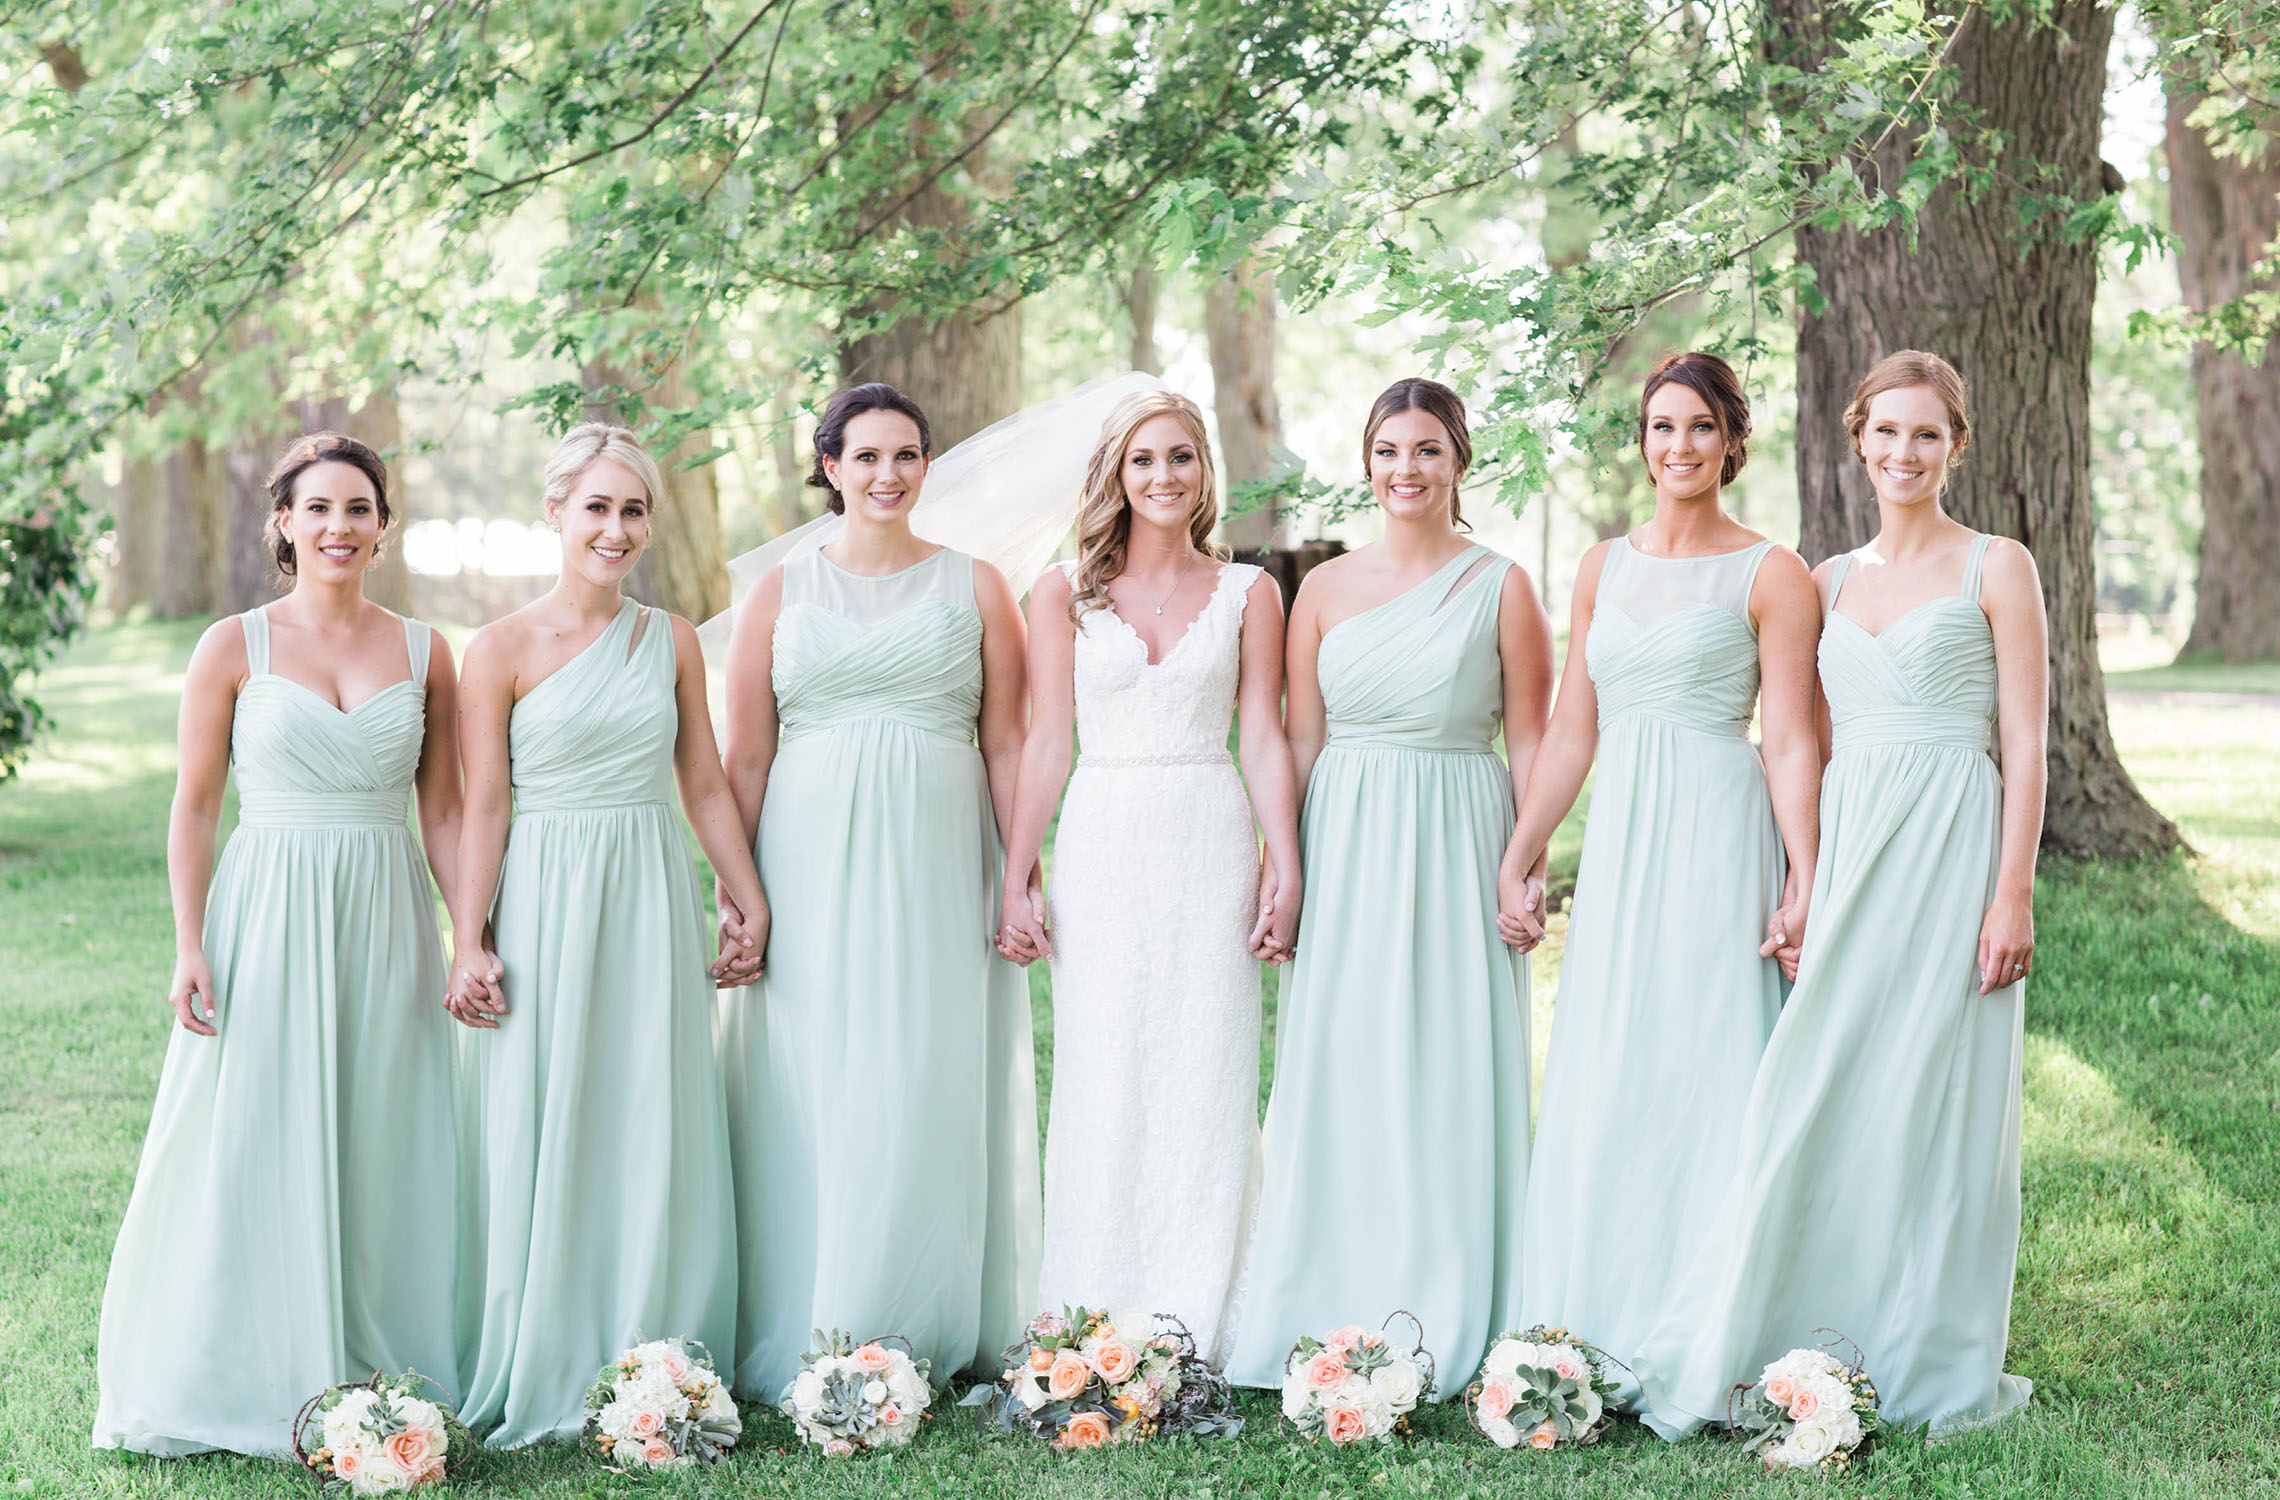 Bride and maids posing for formal picture. all wearing sea foam green dresses.